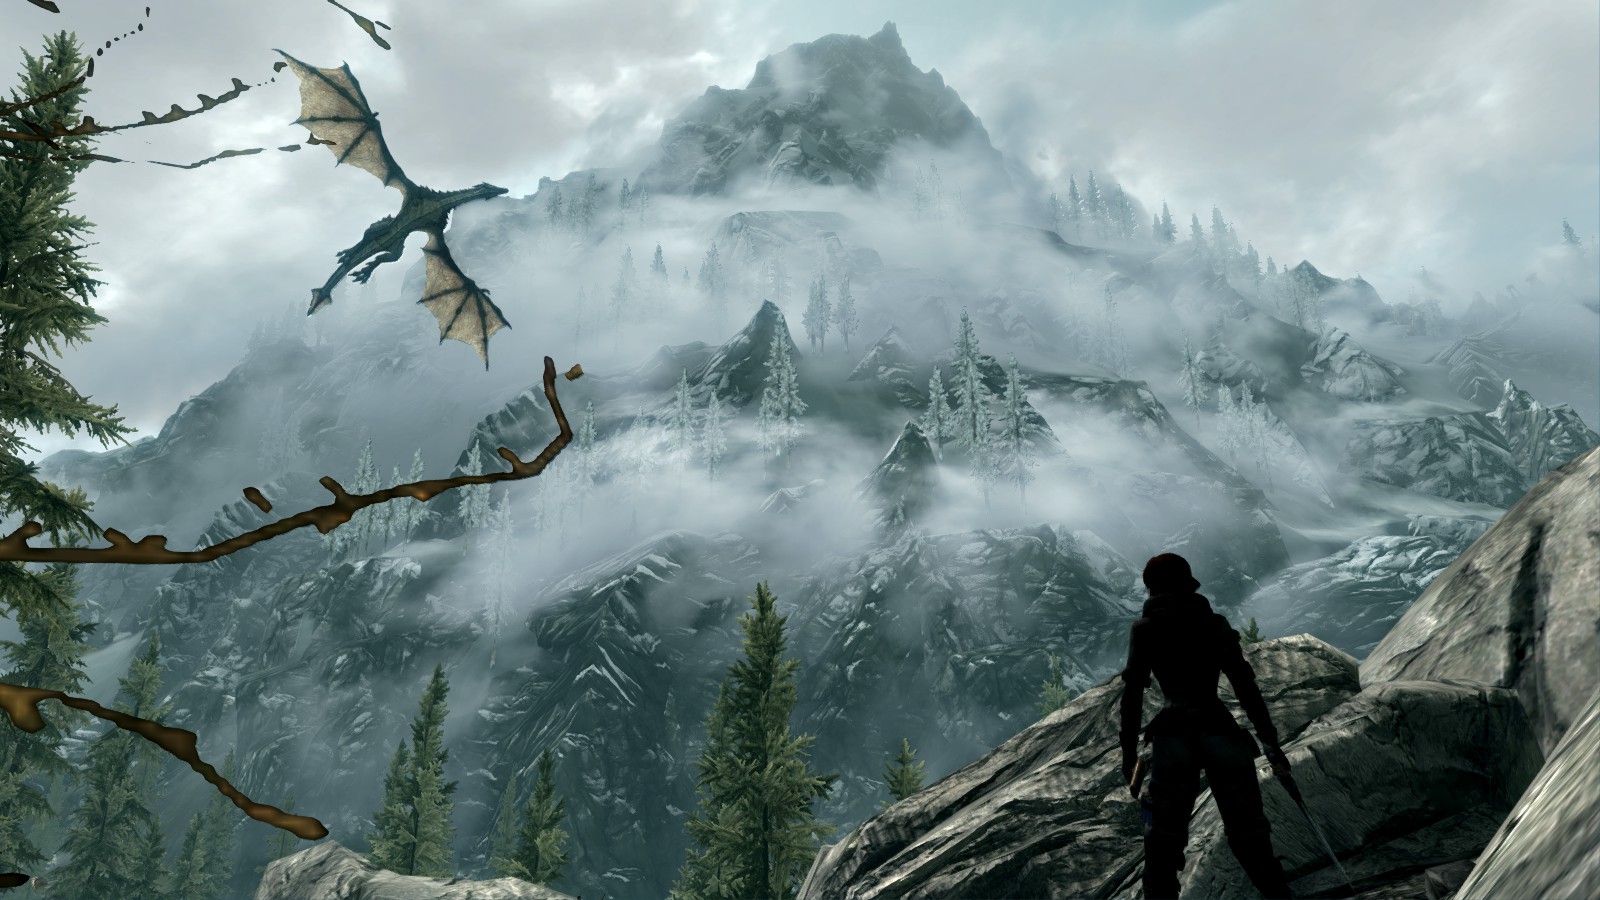 Skyrim Scenery Shot By Leted88